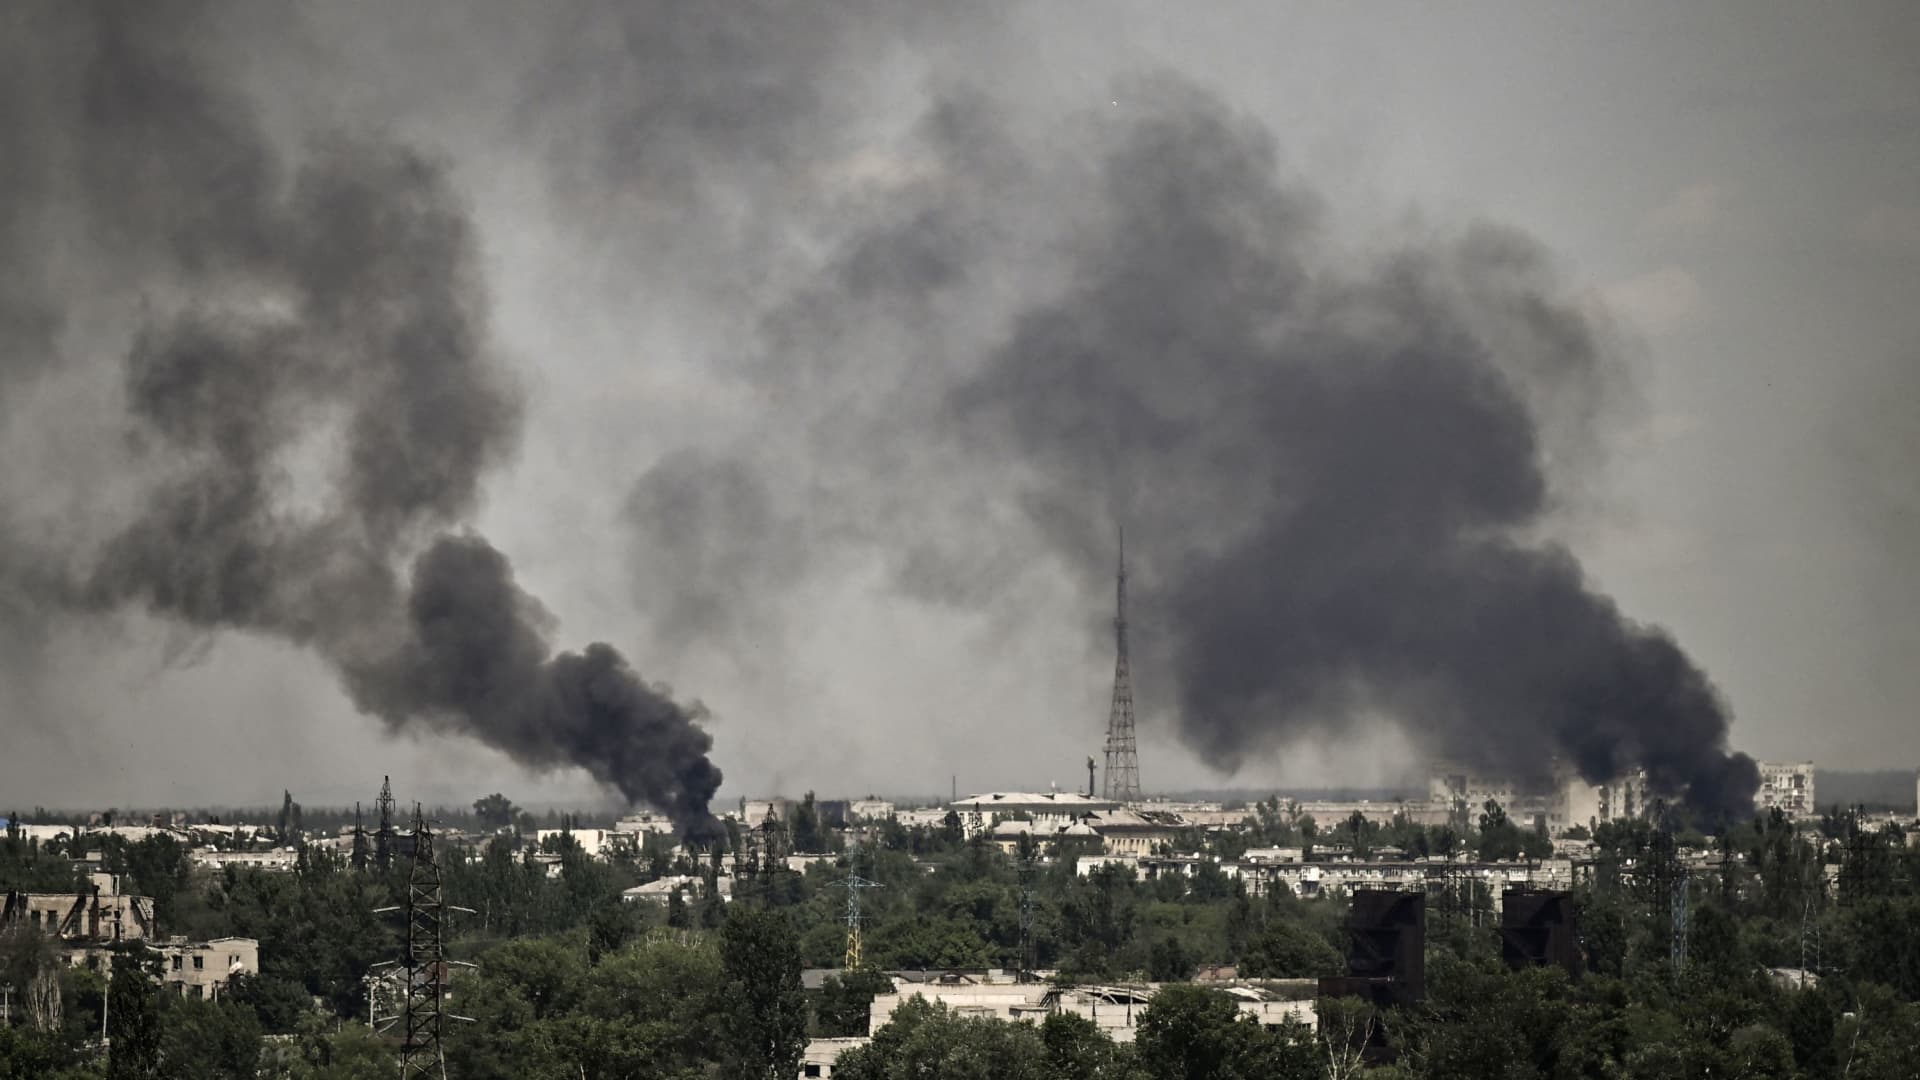 Smoke rises in the city of Severodonetsk during heavy fightings between Ukrainian and Russian troops at eastern Ukrainian region of Donbas on May 30, 2022, on the 96th day of the Russian invasion of Ukraine.